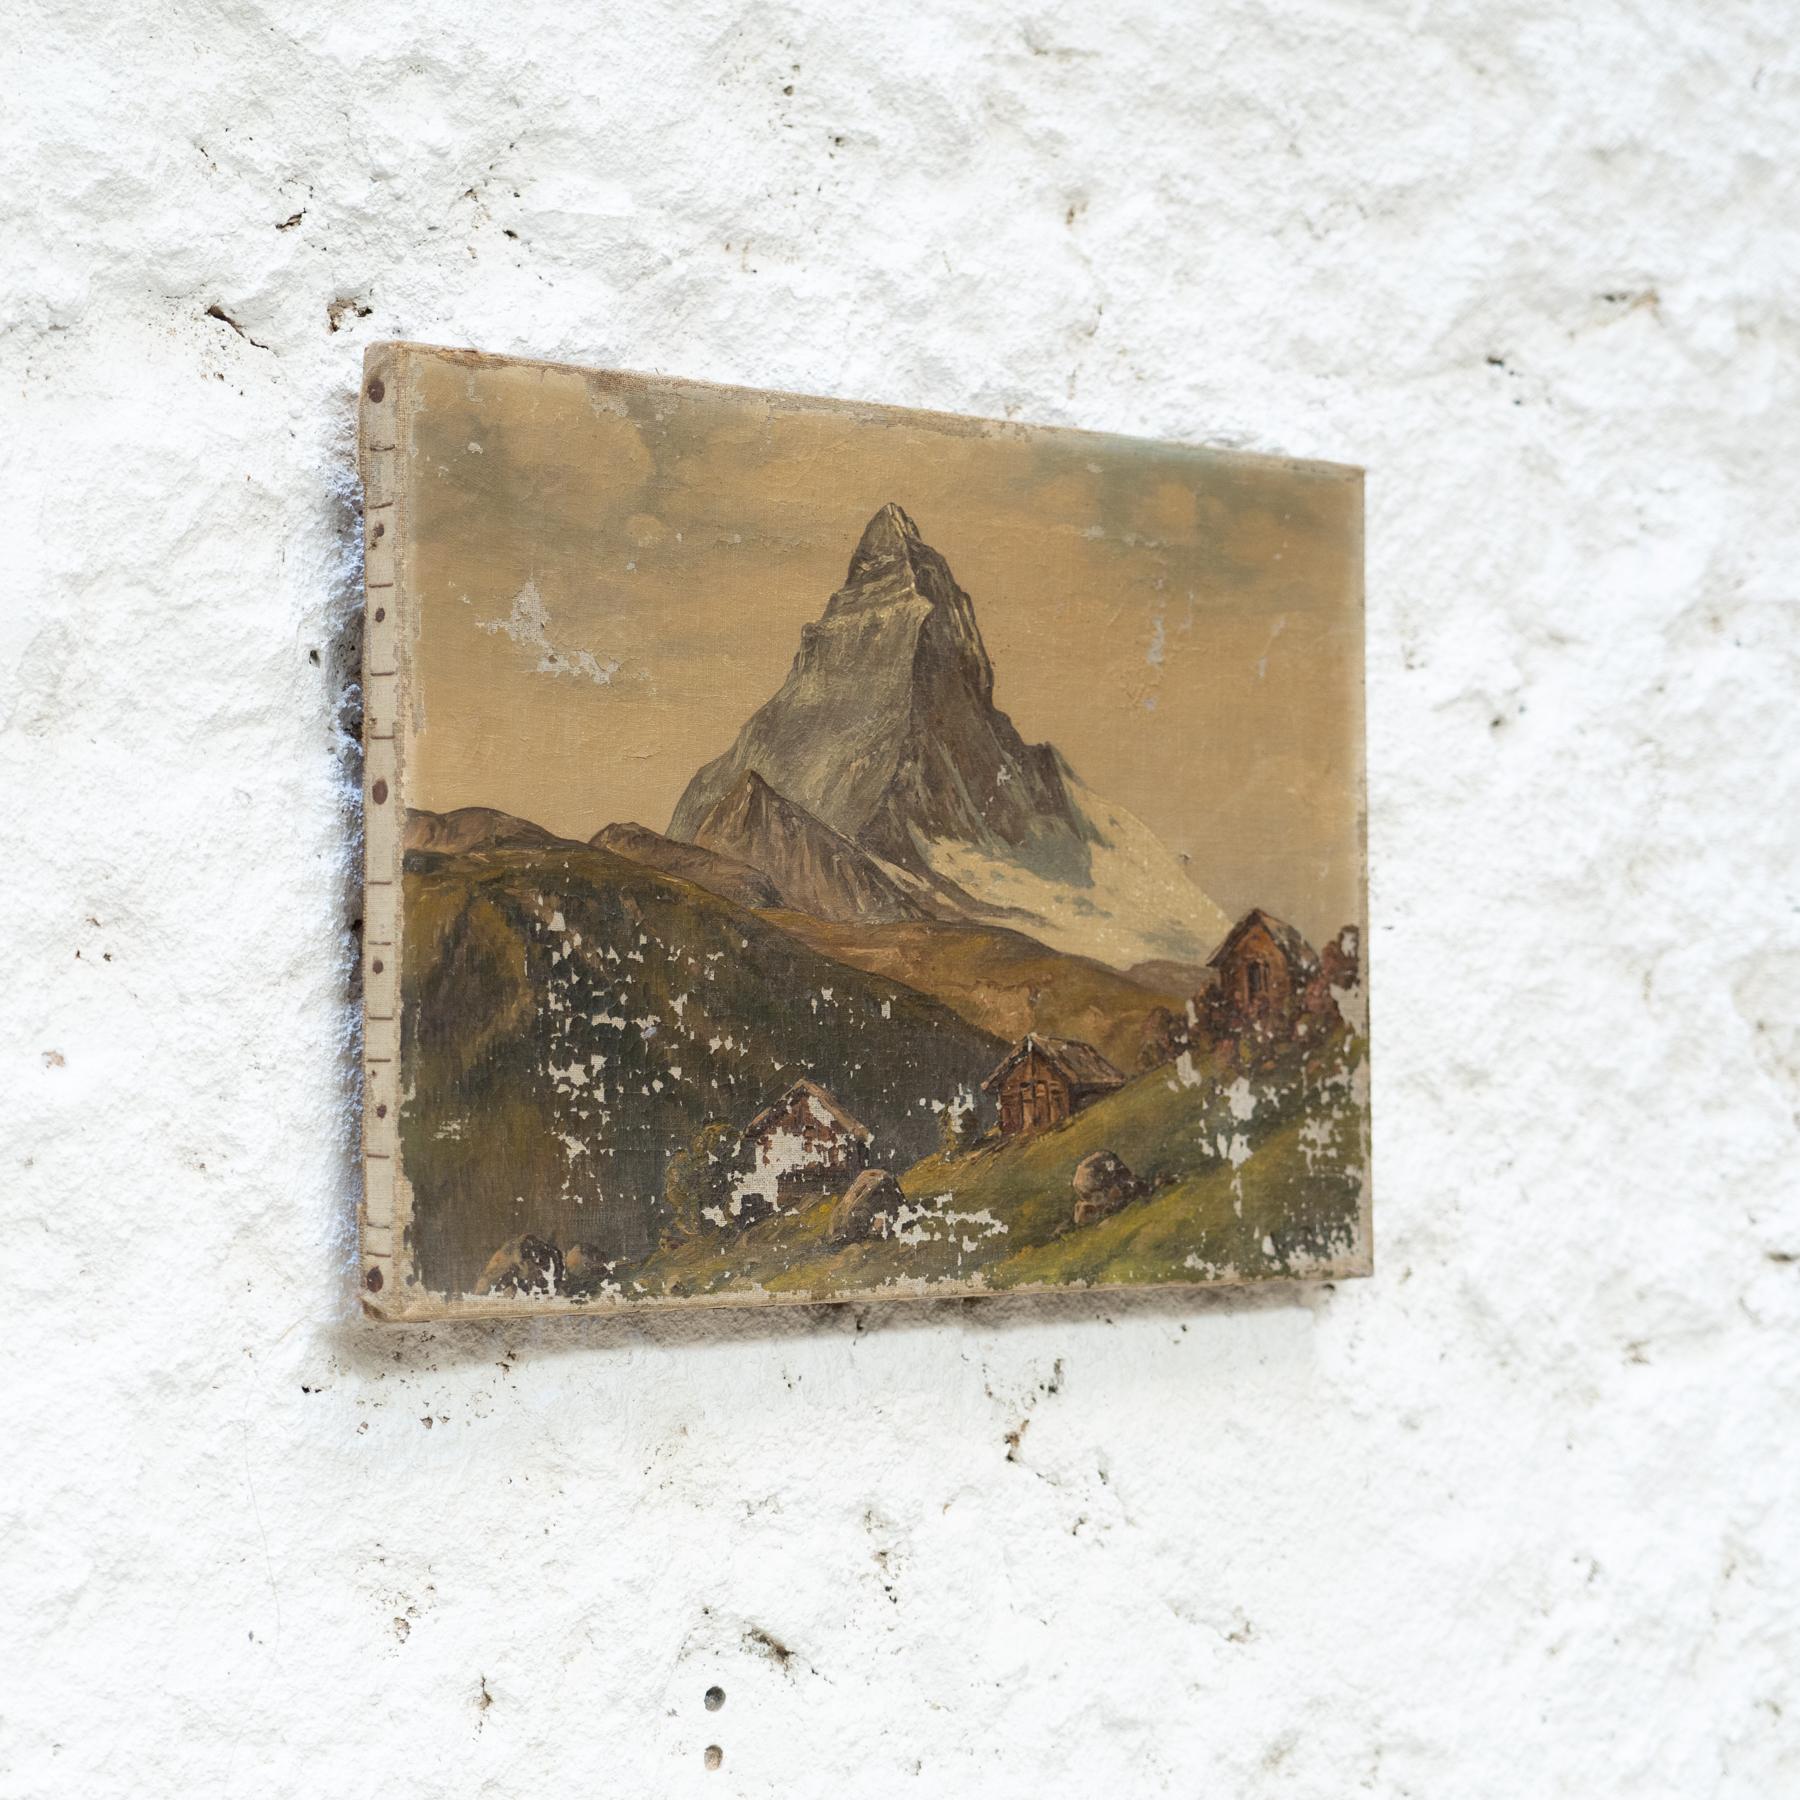 Early 20th Century Oil on Canvas Matterhorn Artwork

By unknown artist, from France

In fair condition, with minor wear consistent of age and use, preserving a beautiful patina